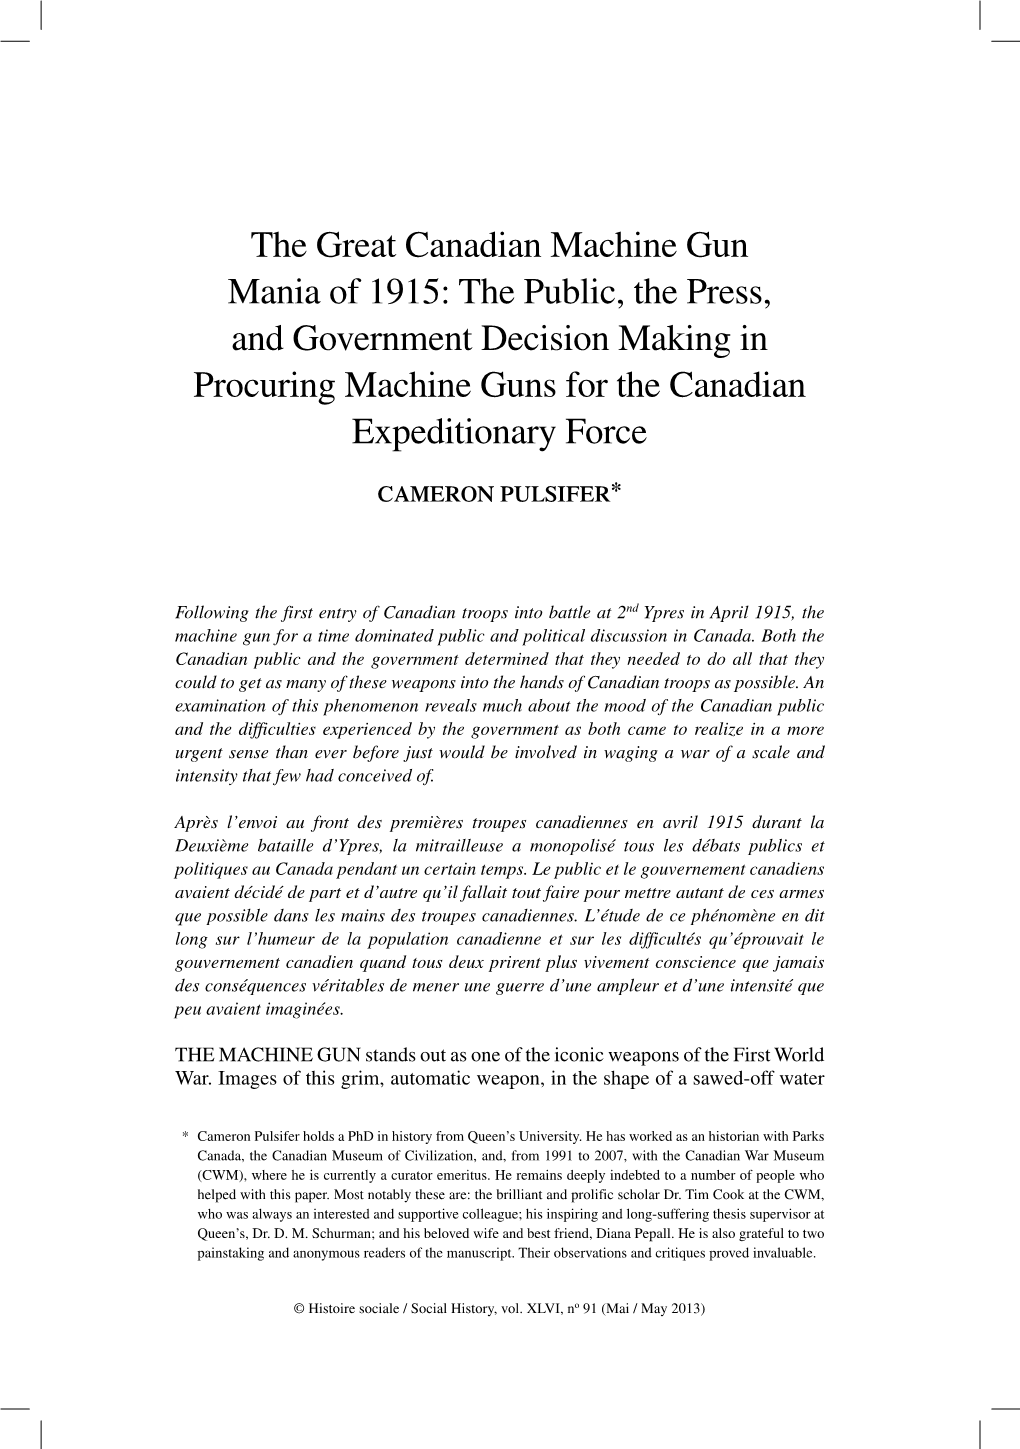 The Great Canadian Machine Gun Mania of 1915: the Public, the Press, and Government Decision Making in Procuring Machine Guns for the Canadian Expeditionary Force